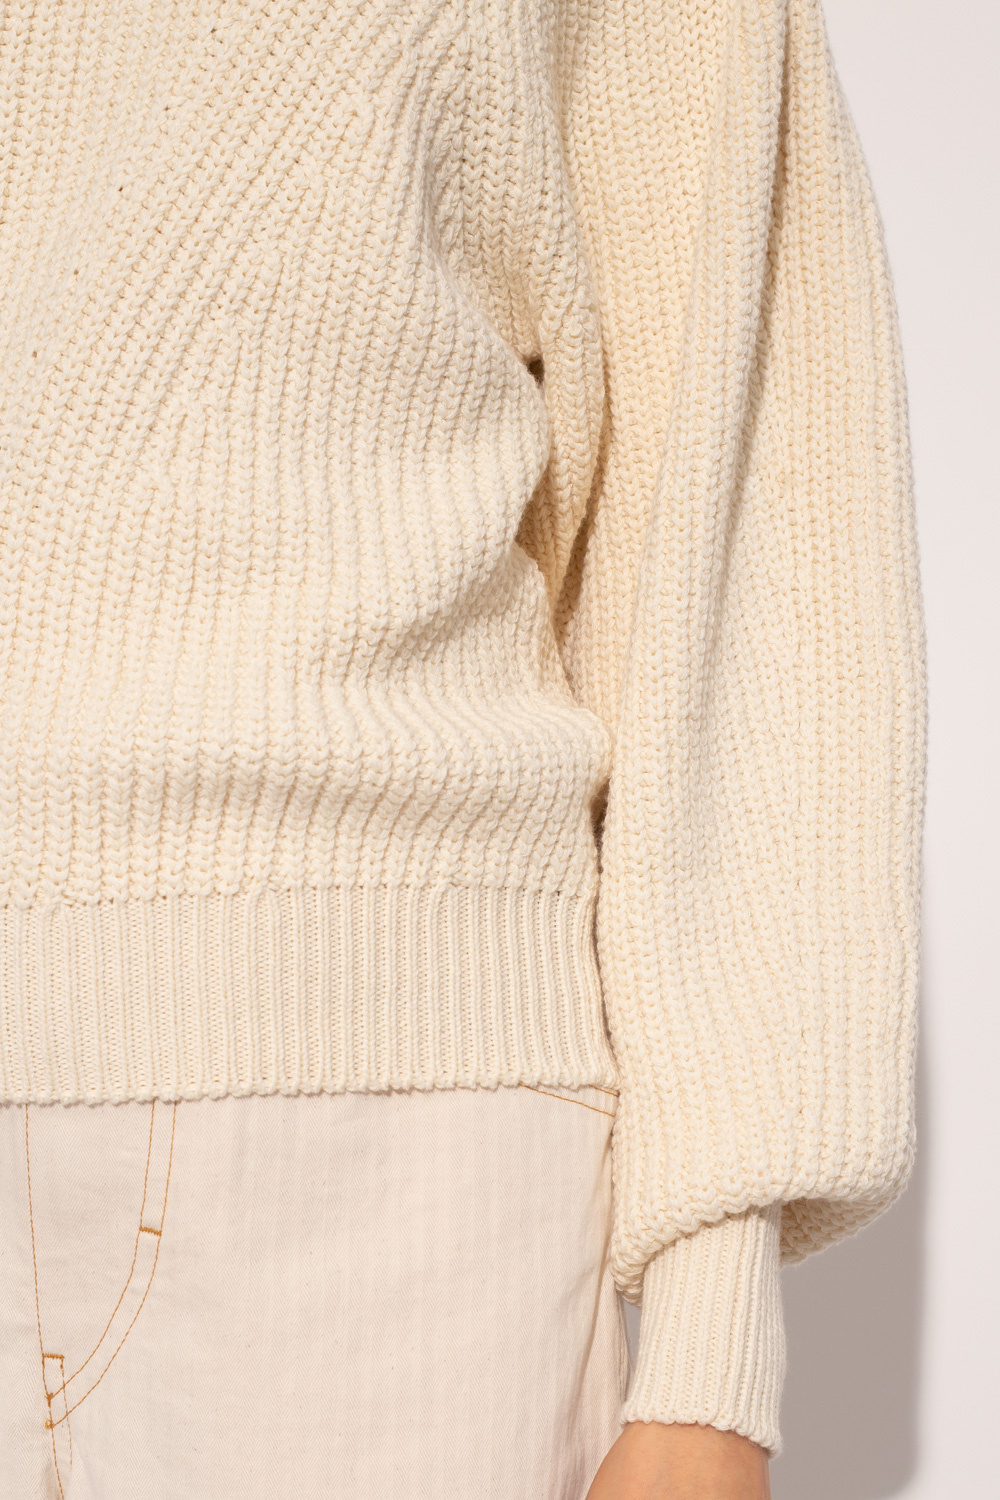 Isabel Marant ‘Adele’ zip-up with puff sleeves